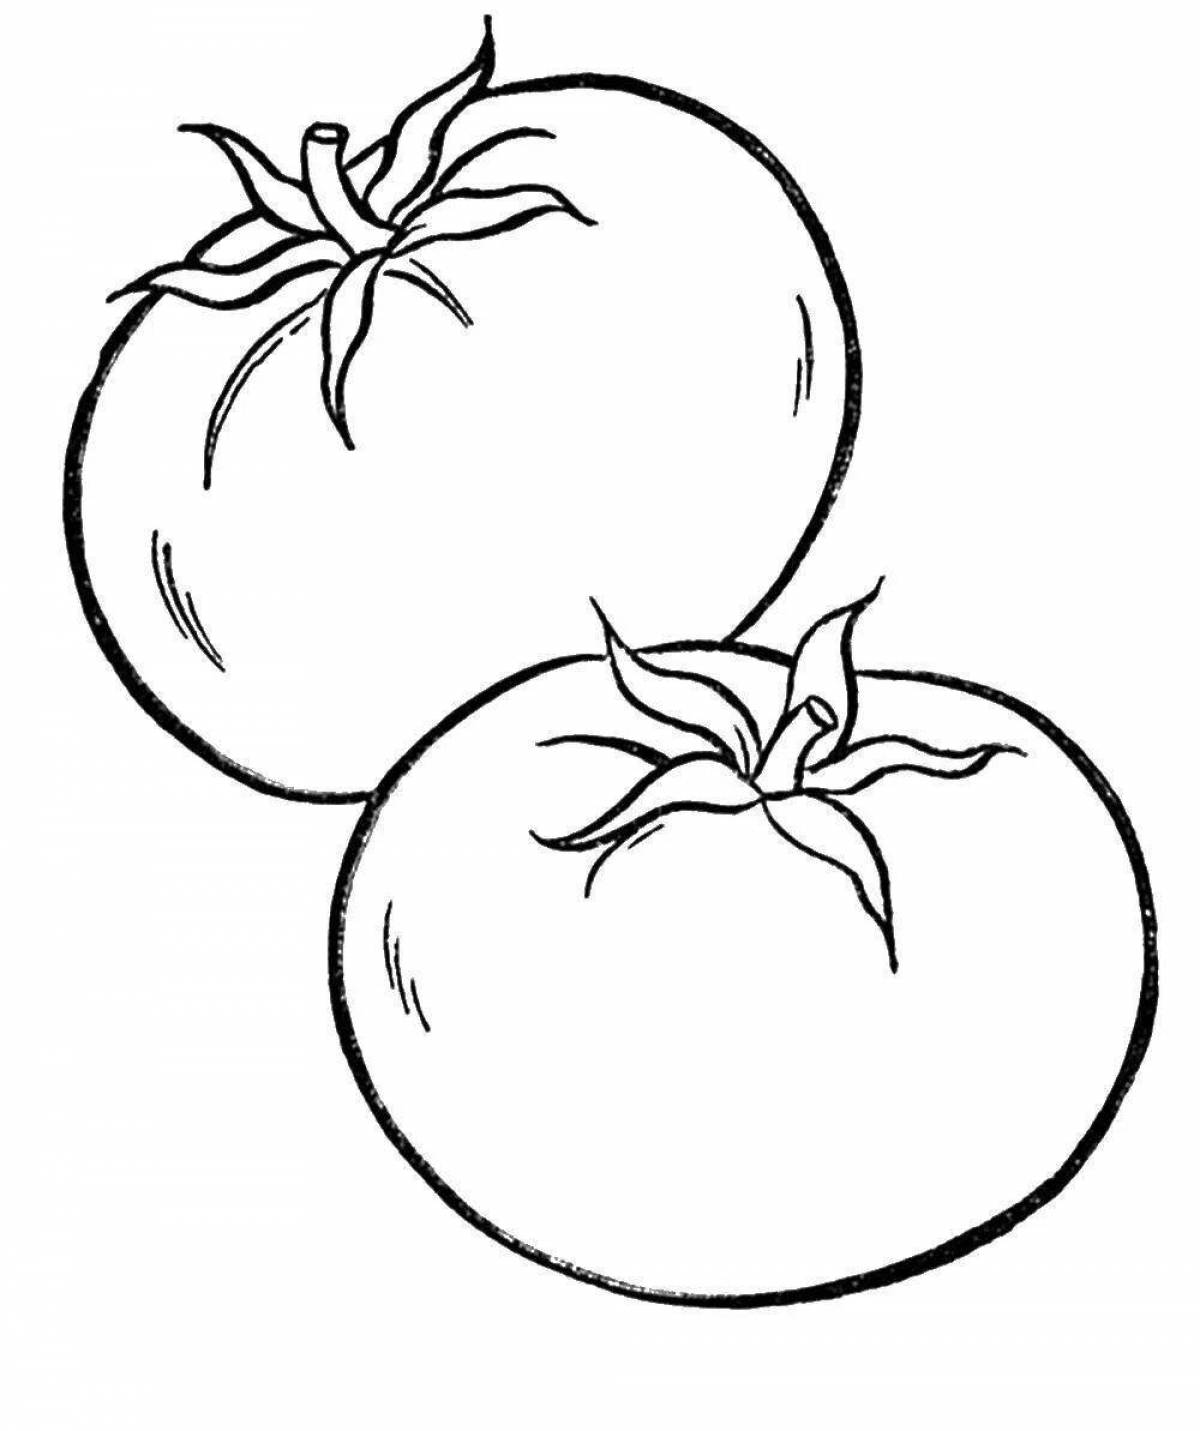 Sweet fruits and vegetables coloring pages for kids